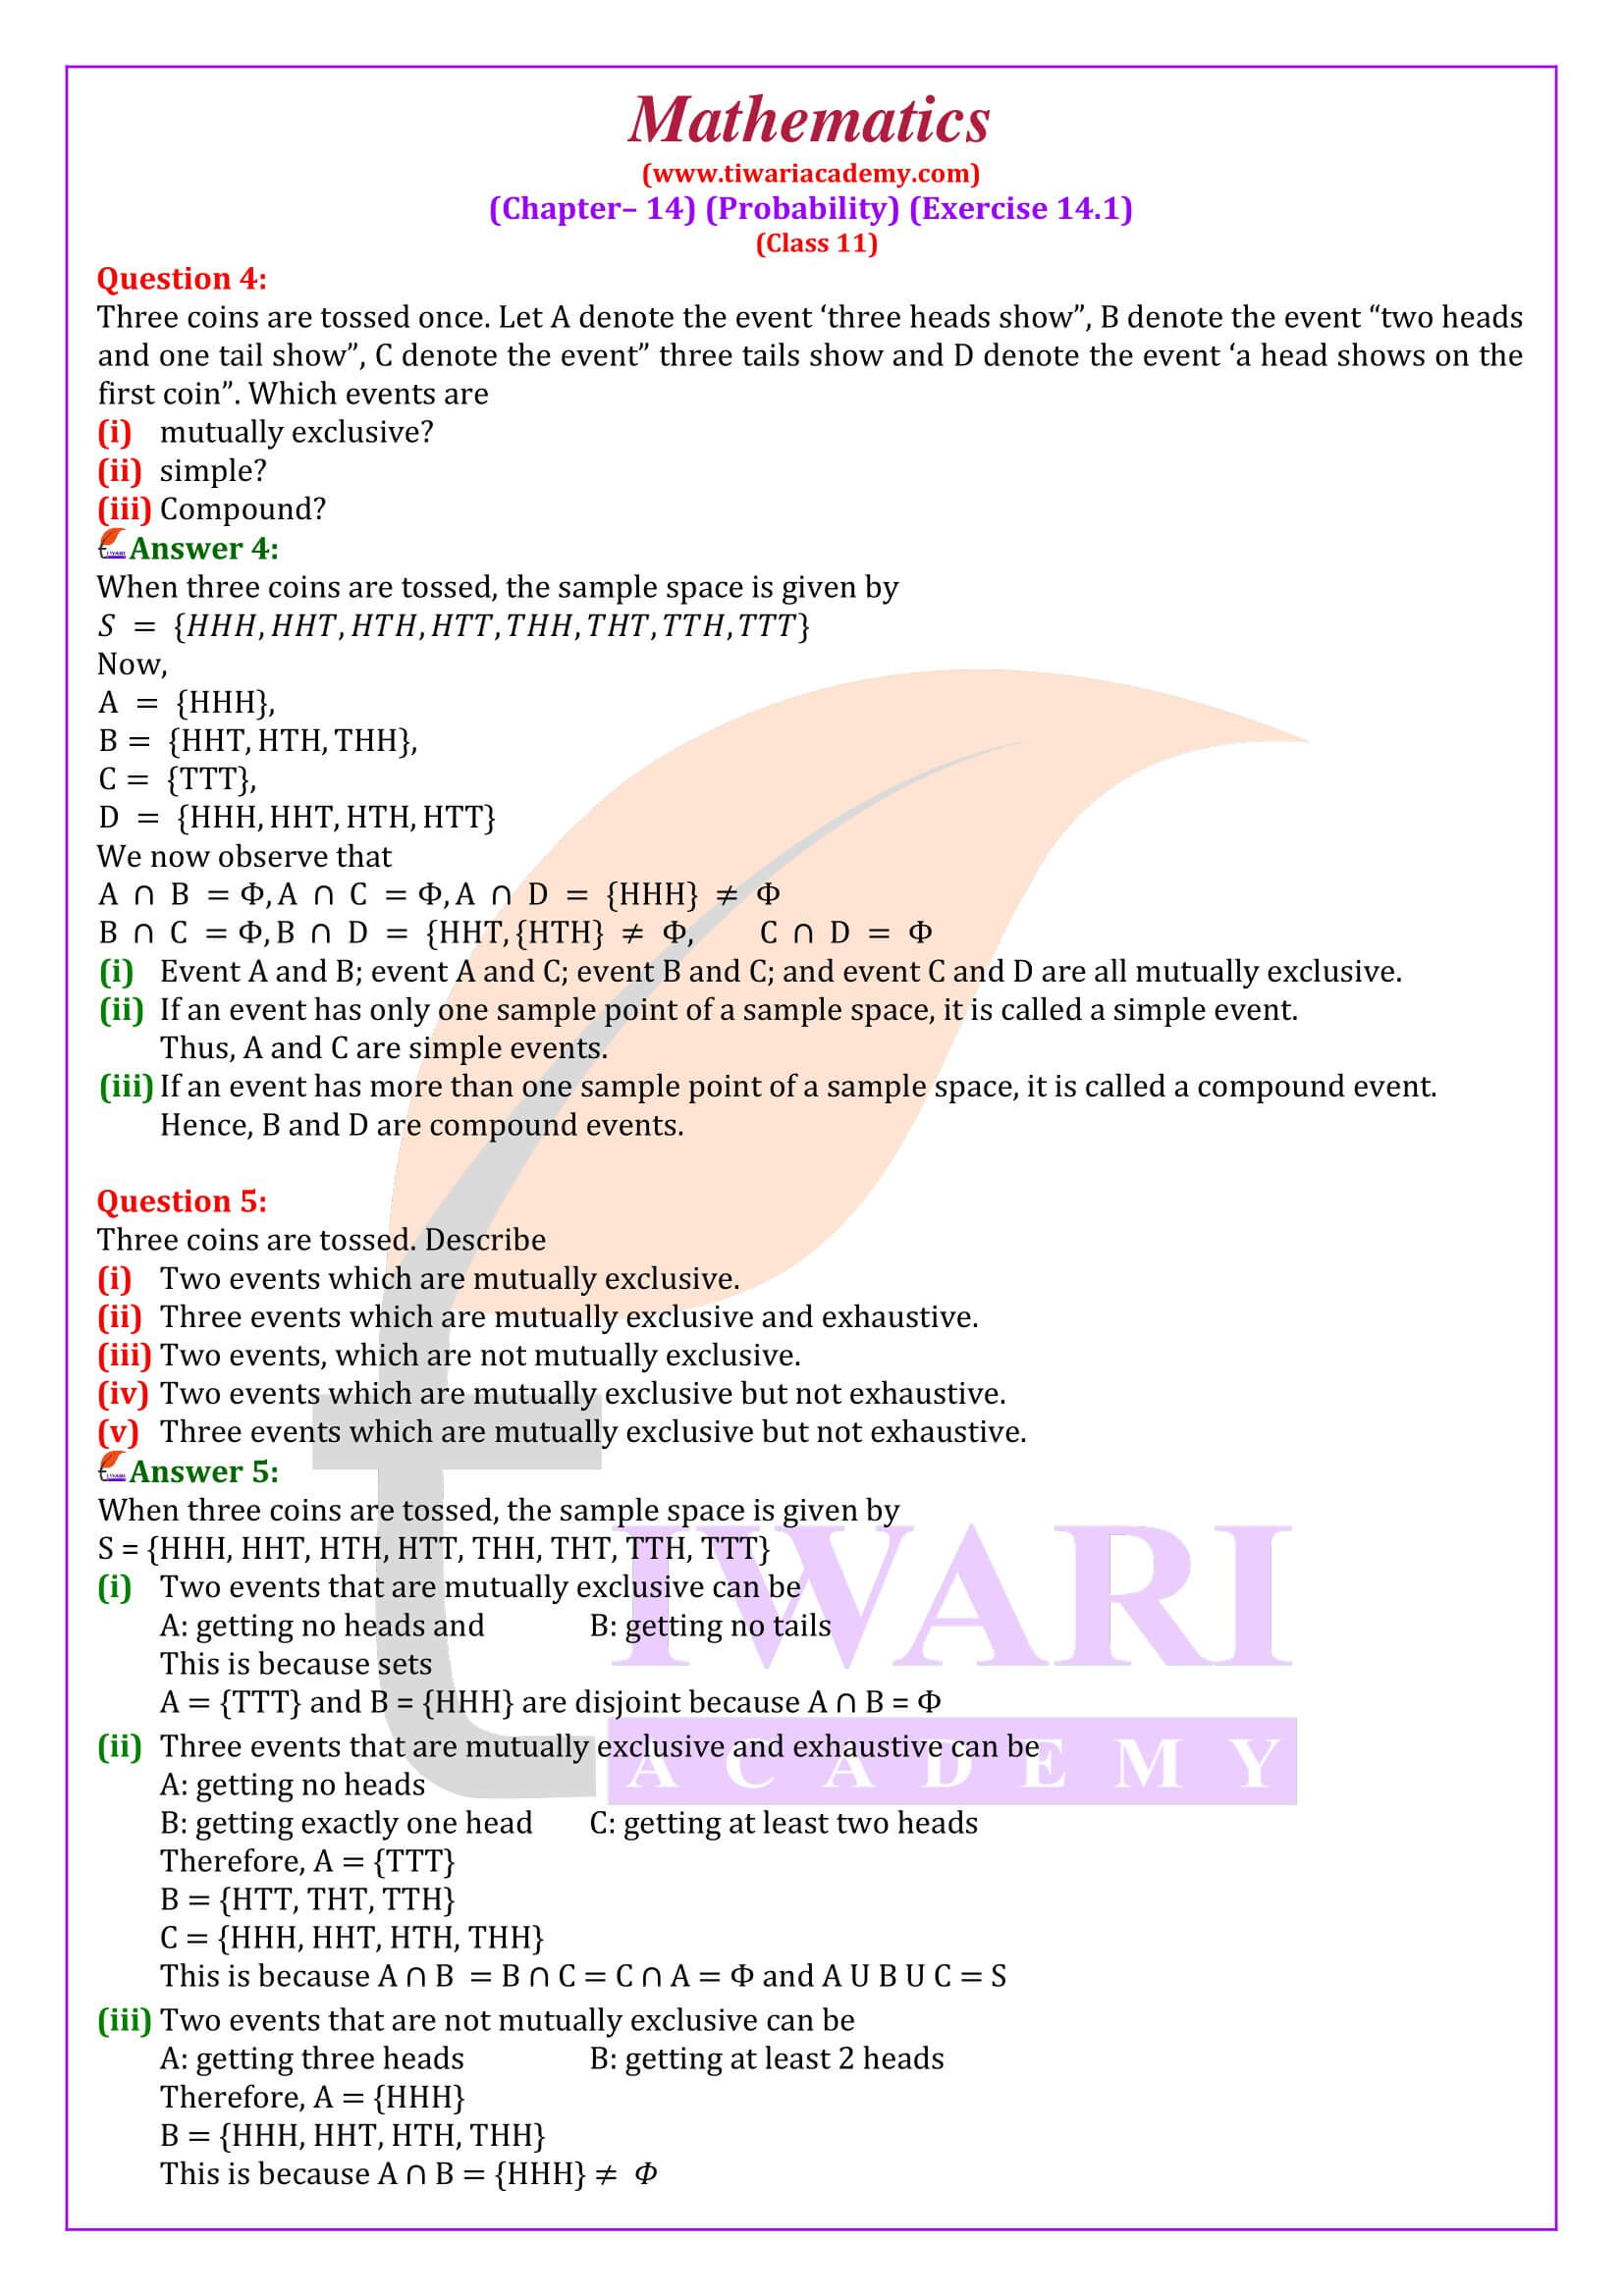 NCERT Solutions for Class 11 Maths Chapter 14 Exercise 14.1 revised for new session